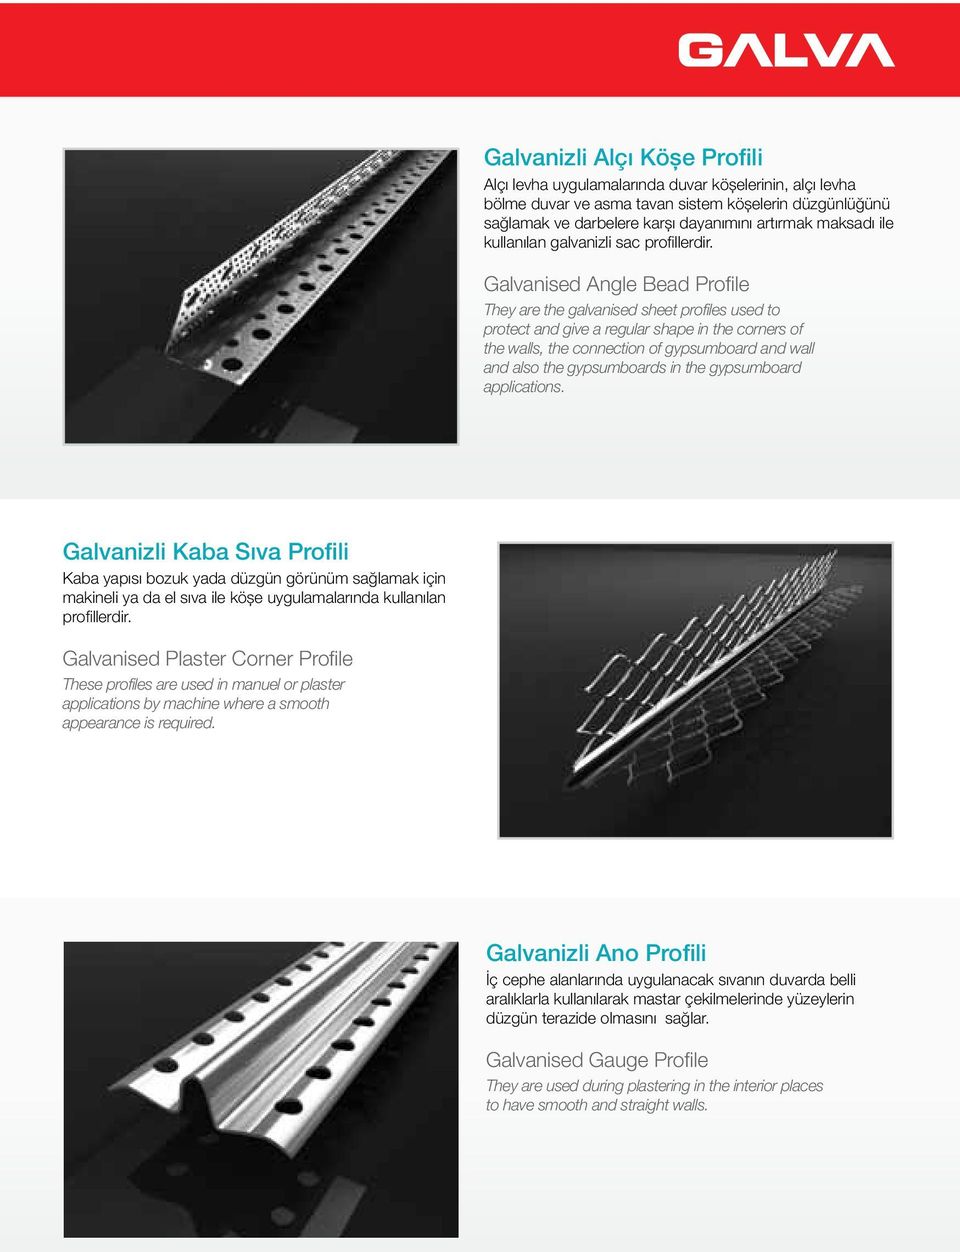 Galvanised Angle Bead Profile They are the galvanised sheet profiles used to protect and give a regular shape in the corners of the walls, the connection of gypsumboard and wall and also the